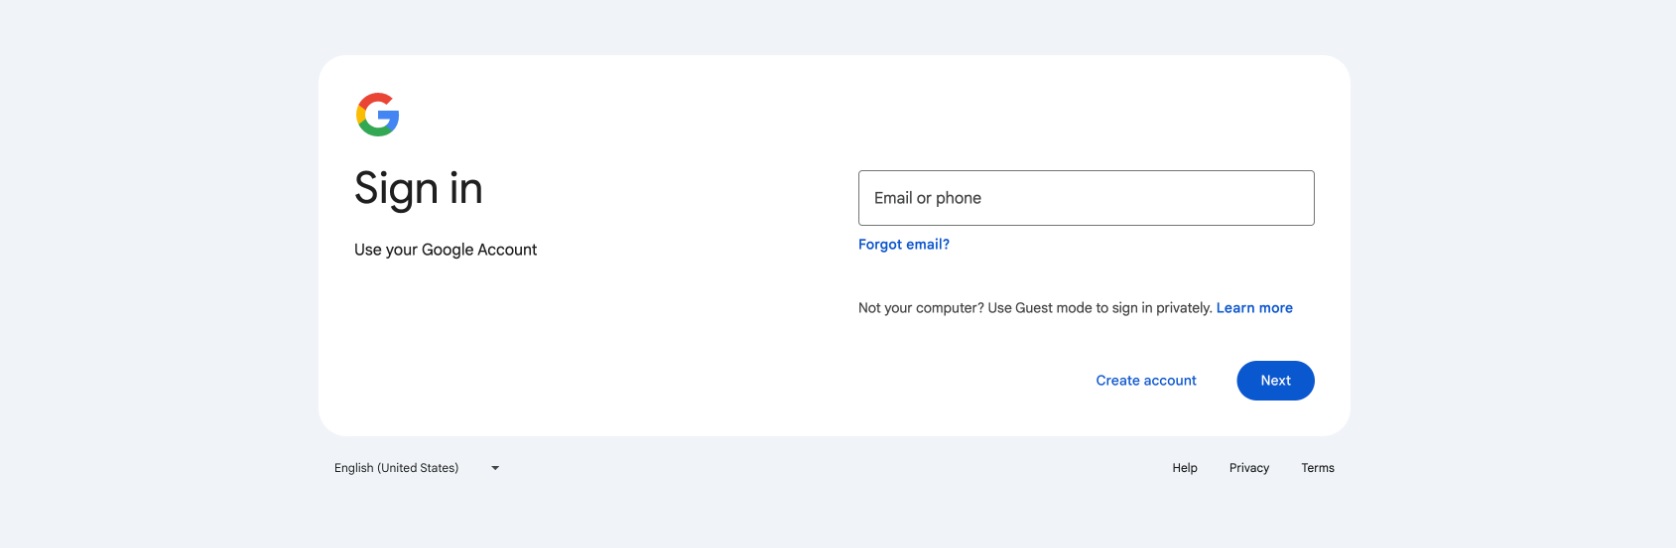 Google has redesigned its Account sign-in interface to look more modern and in line with its Material You design.